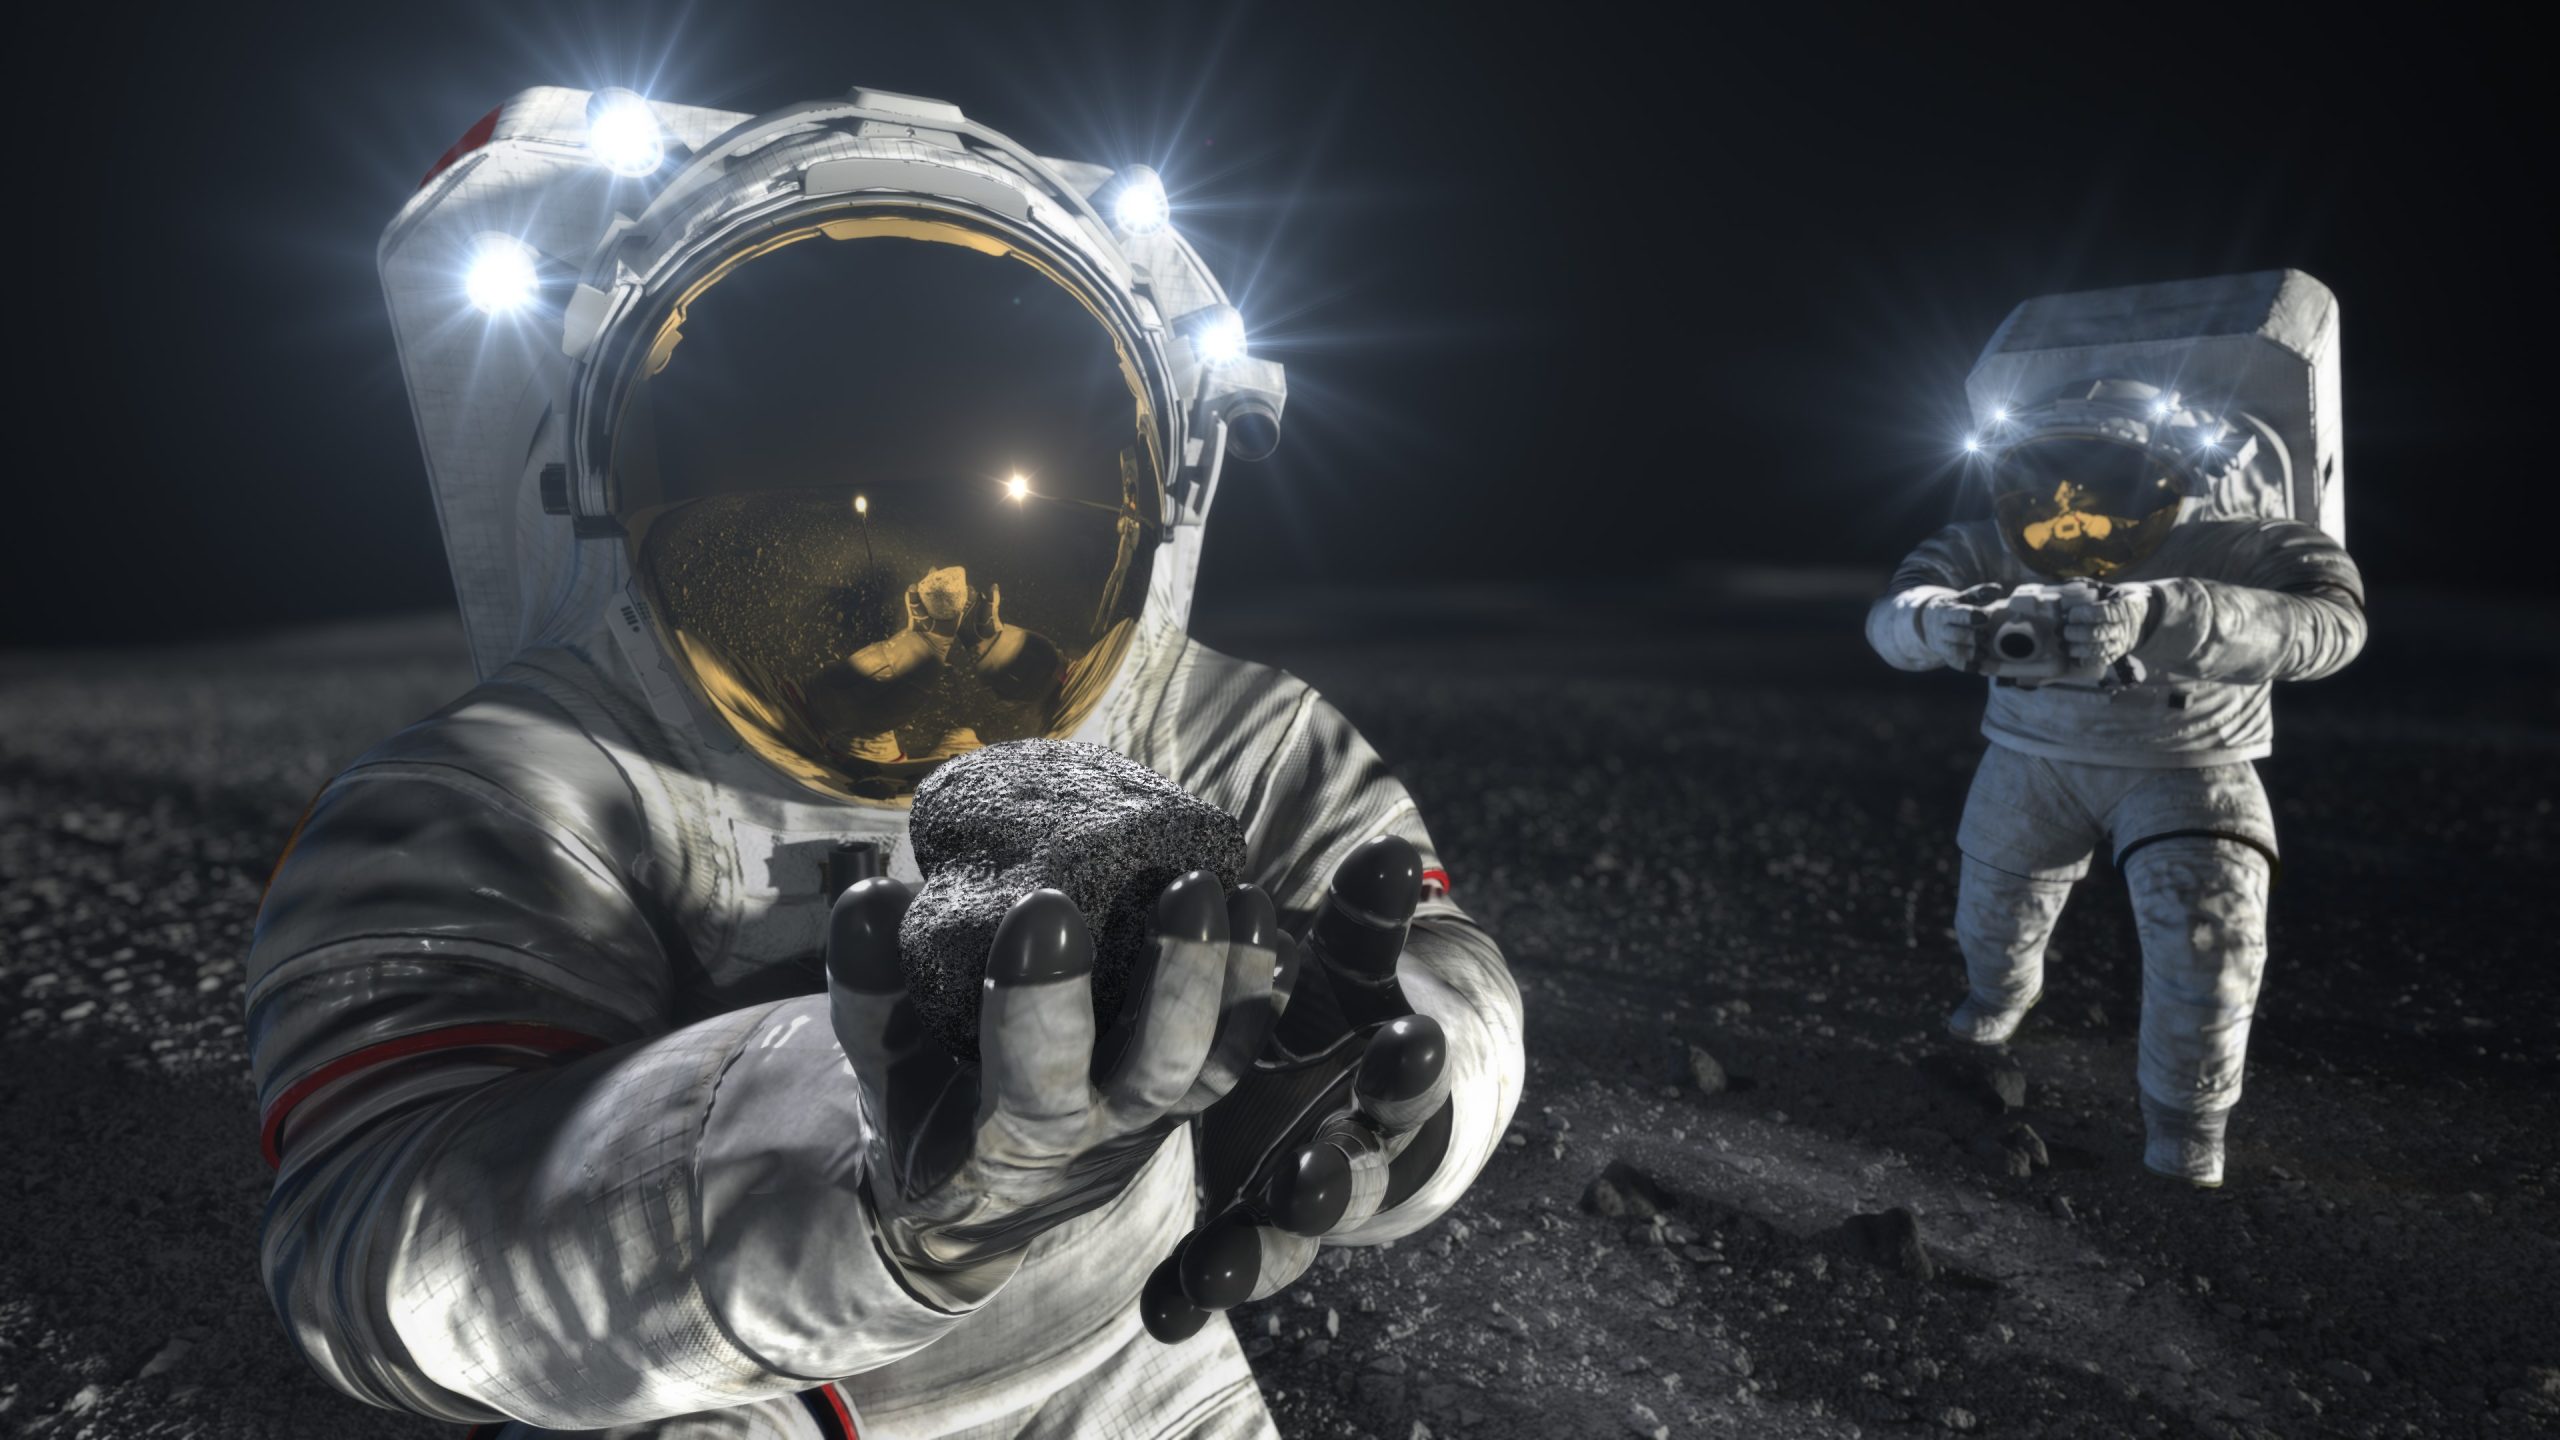 They examined the astronauts' bones and found something alarming